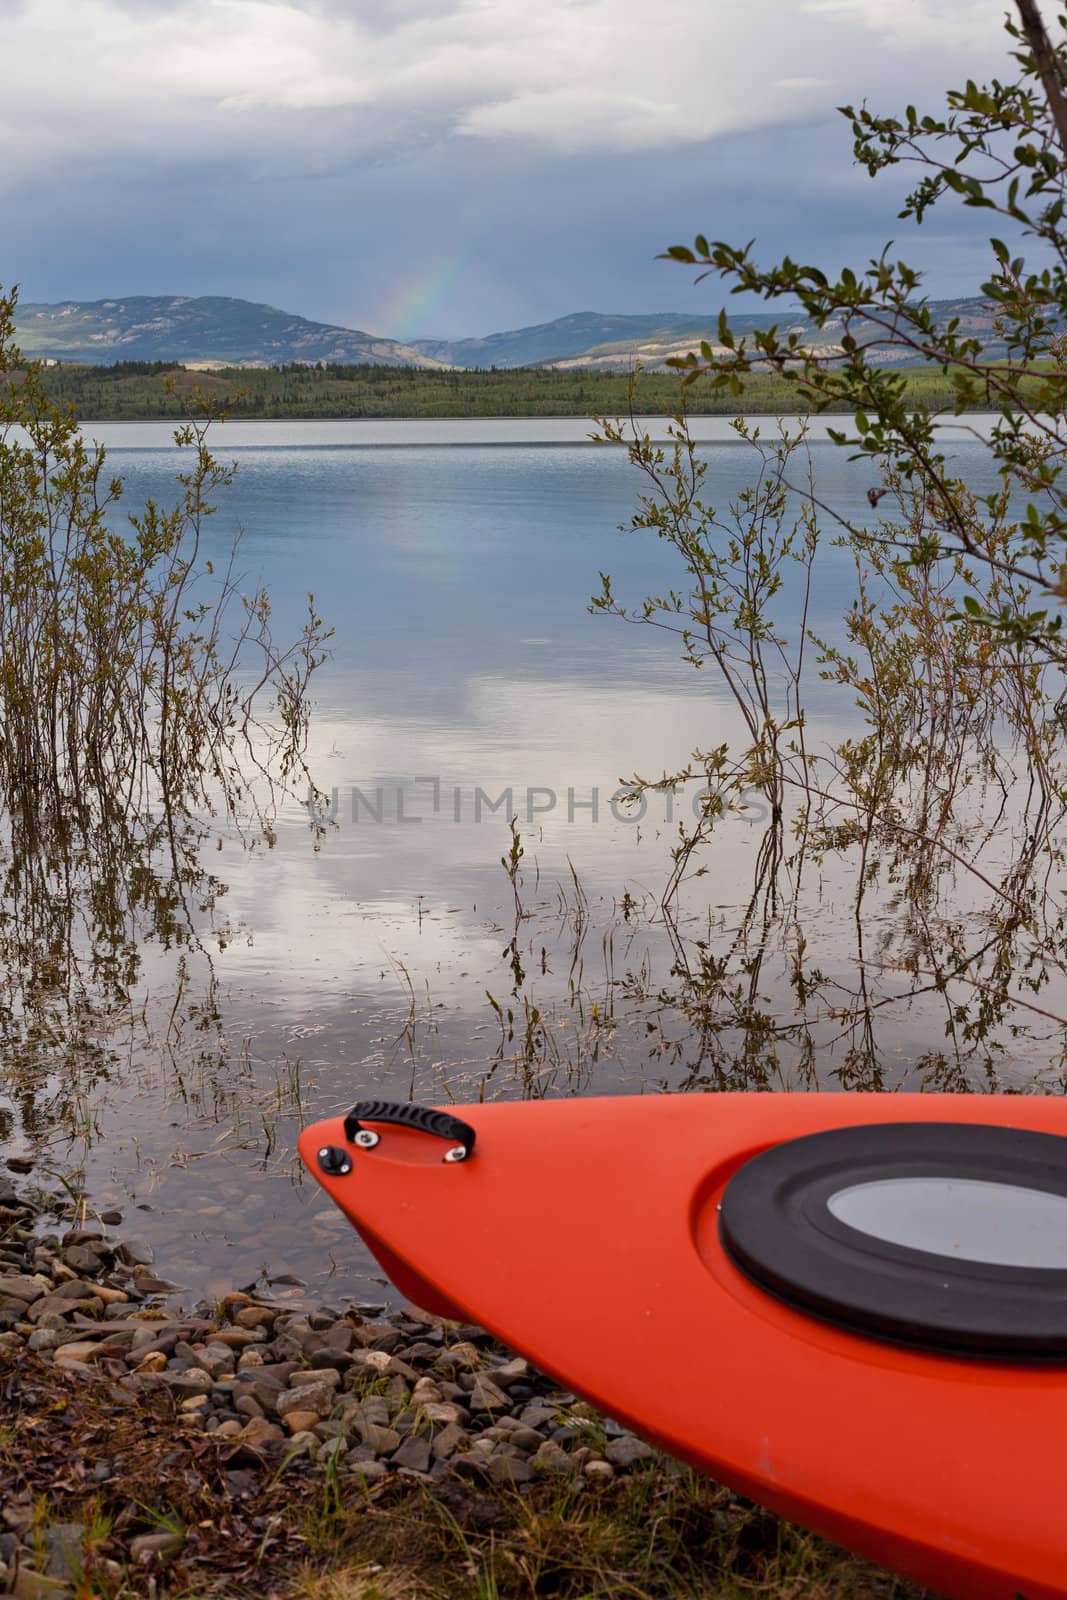 Kayak beached on the shore alongside a tranquil lake with a mountain range in the distance